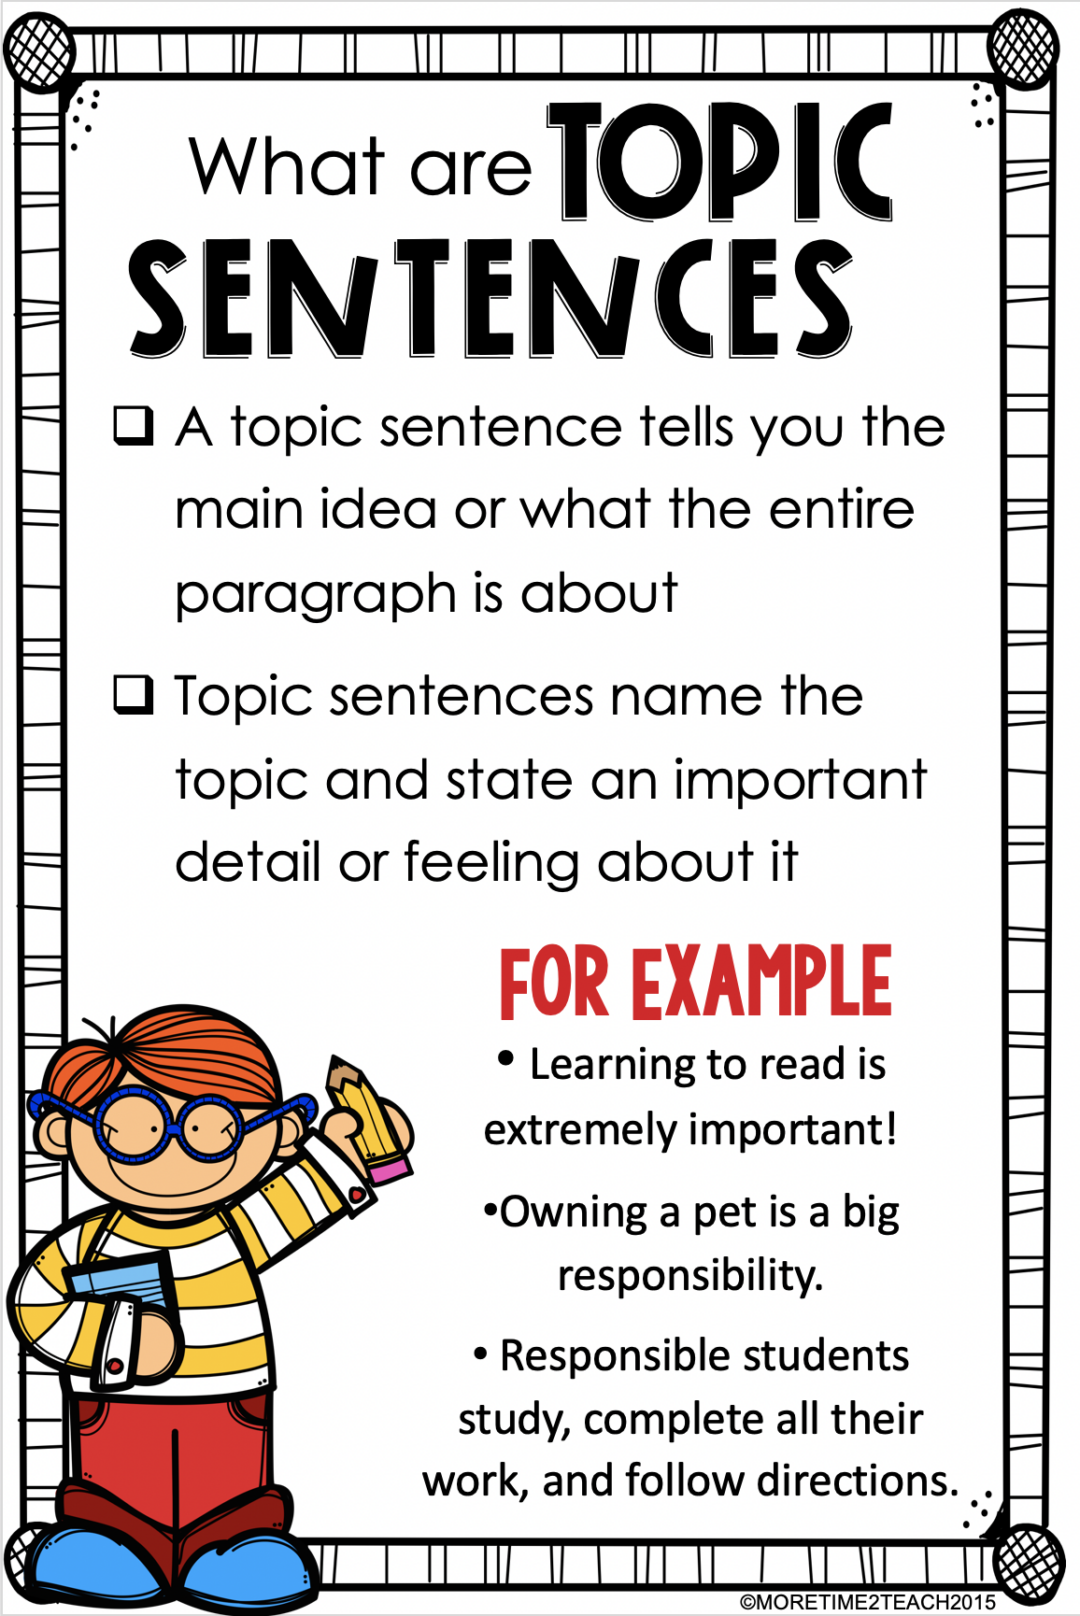 topic sentence meaning